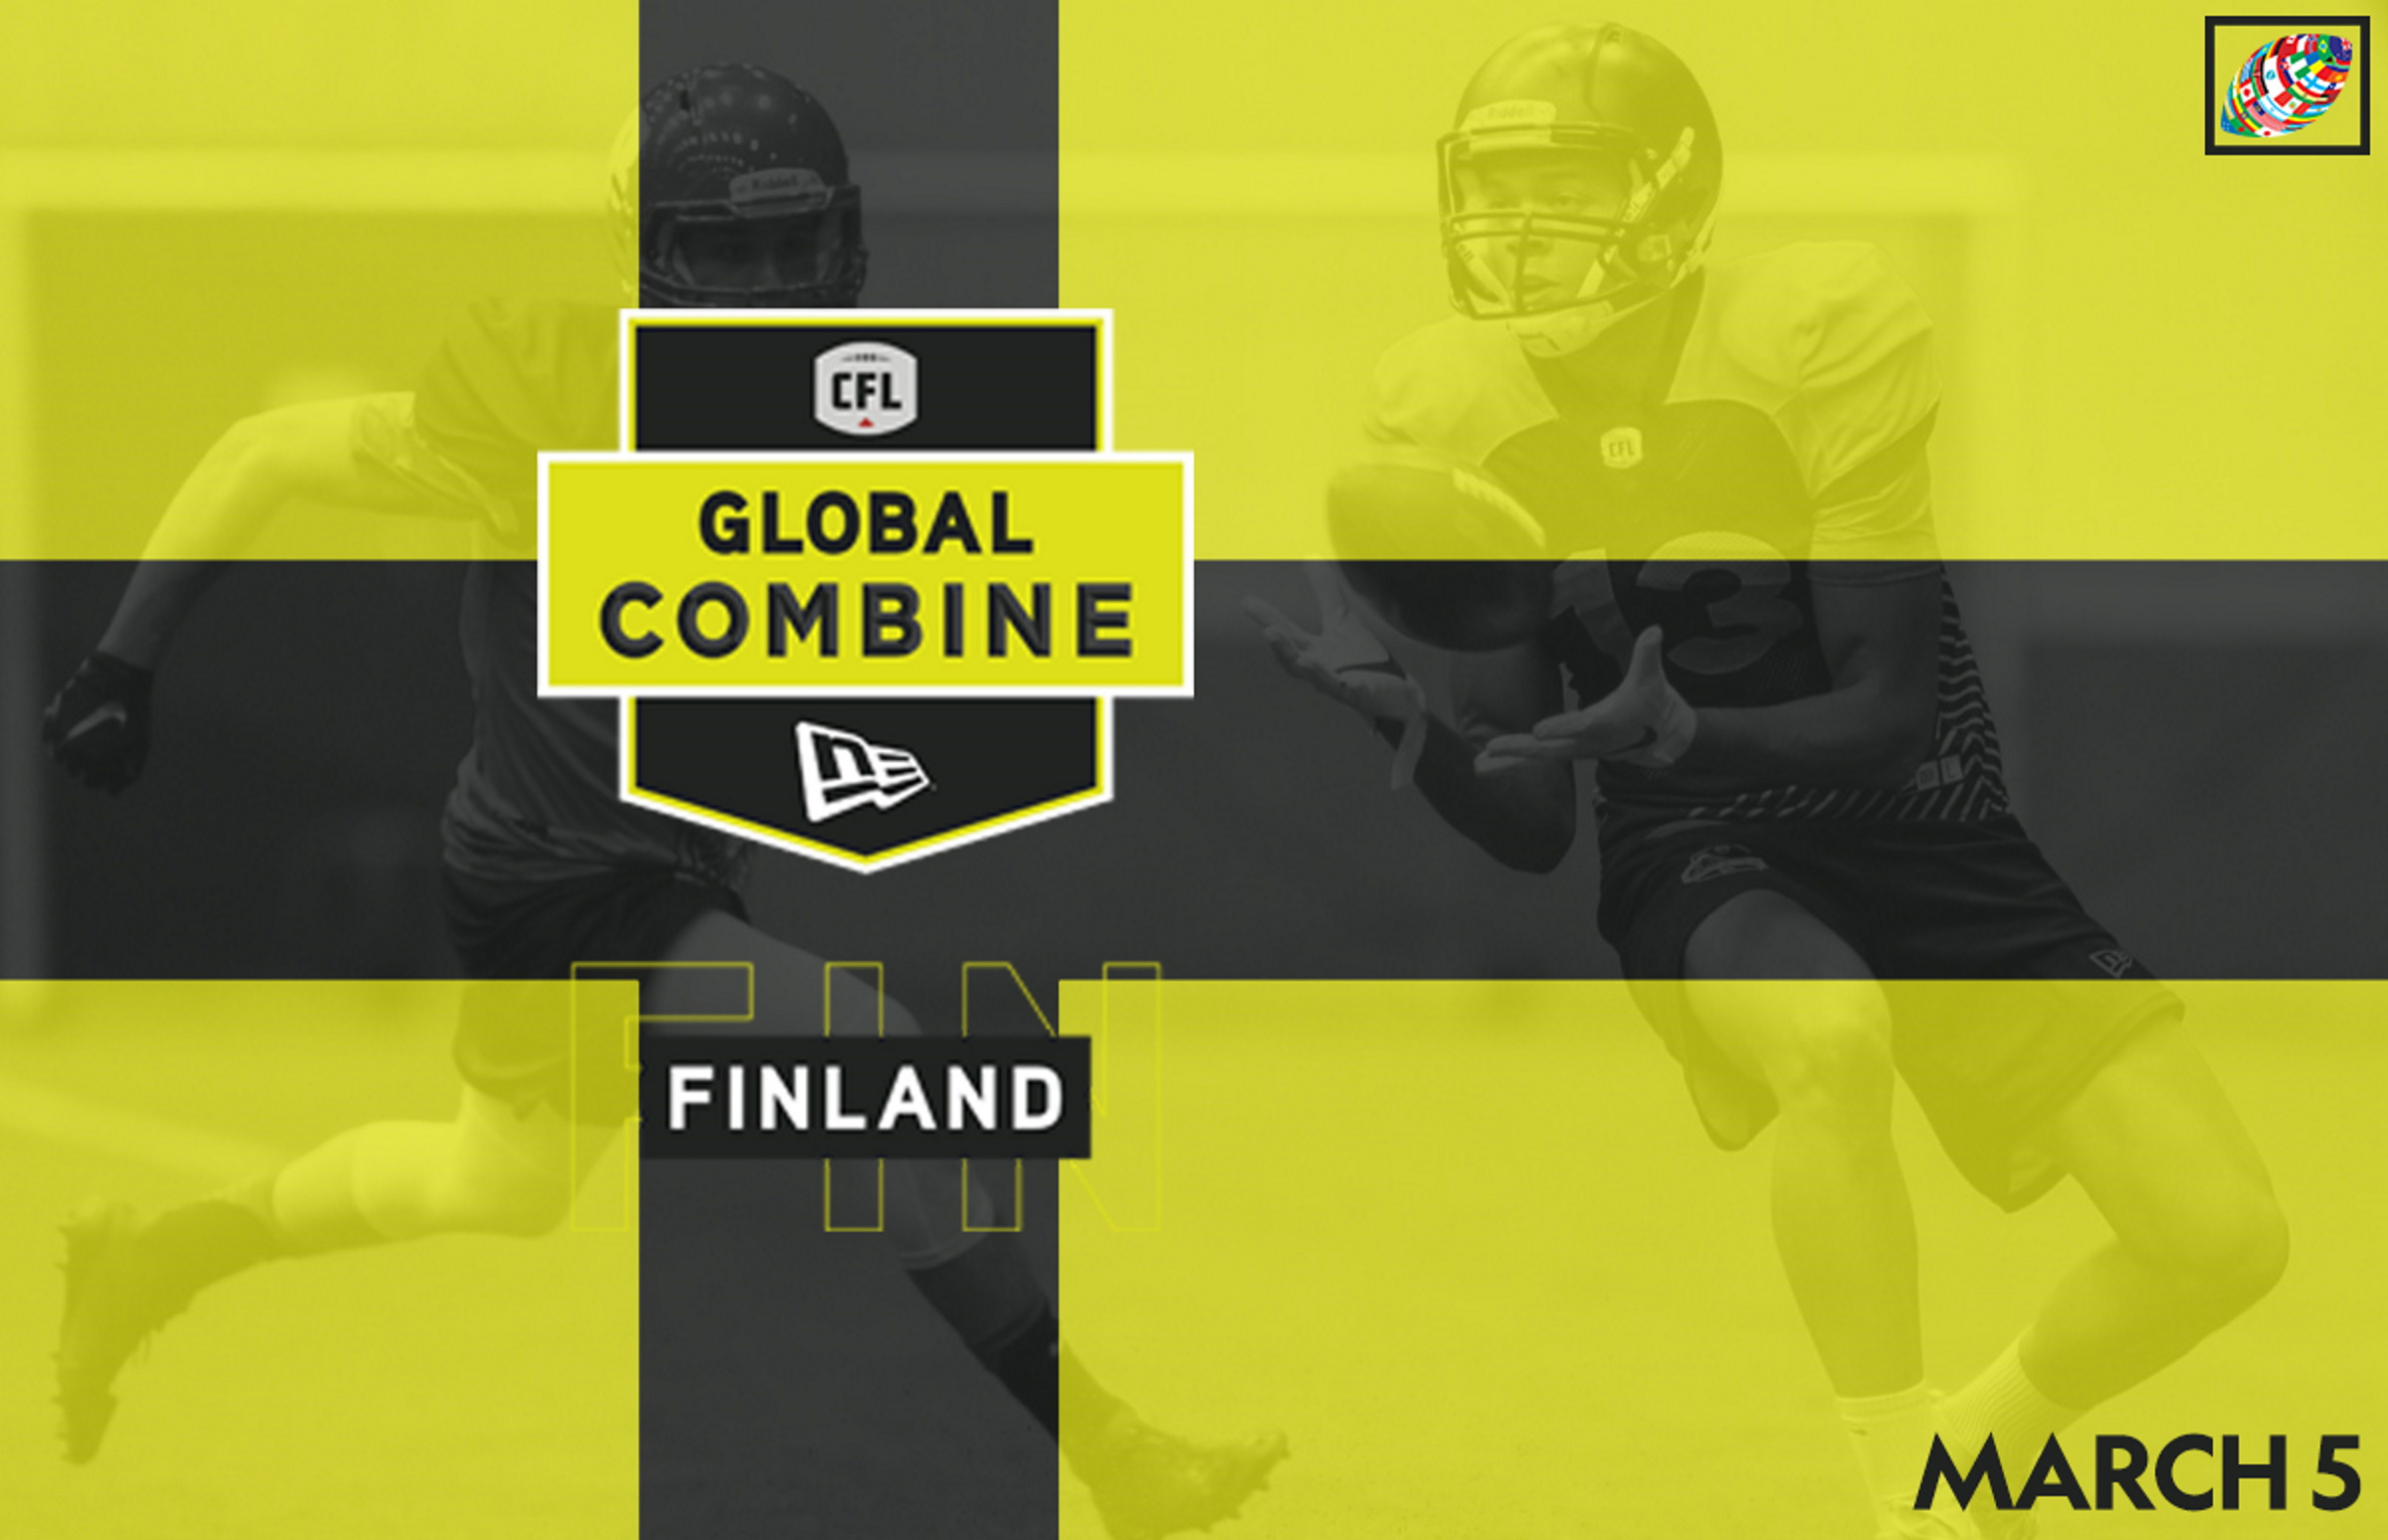 CFL Global Combine in Finland set for March 5